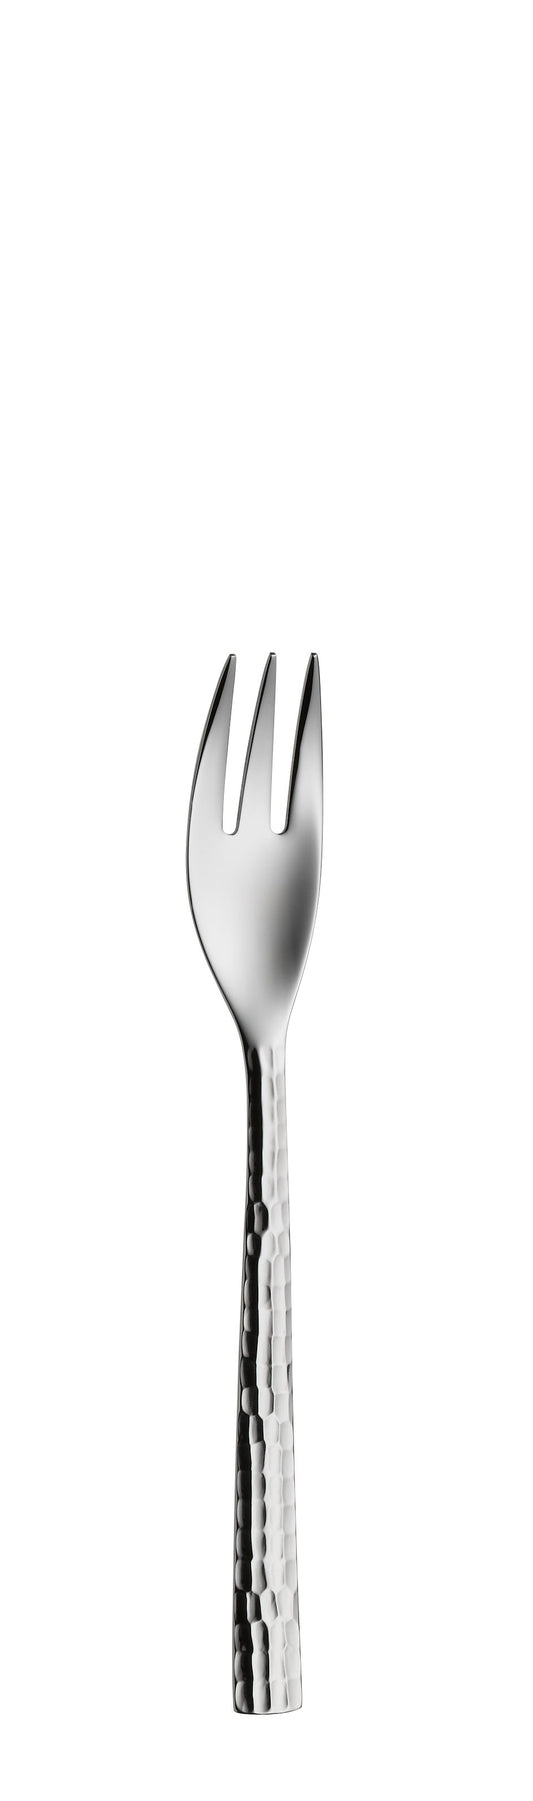 Cake fork 3 prongs LENISTA silverplated 158mm